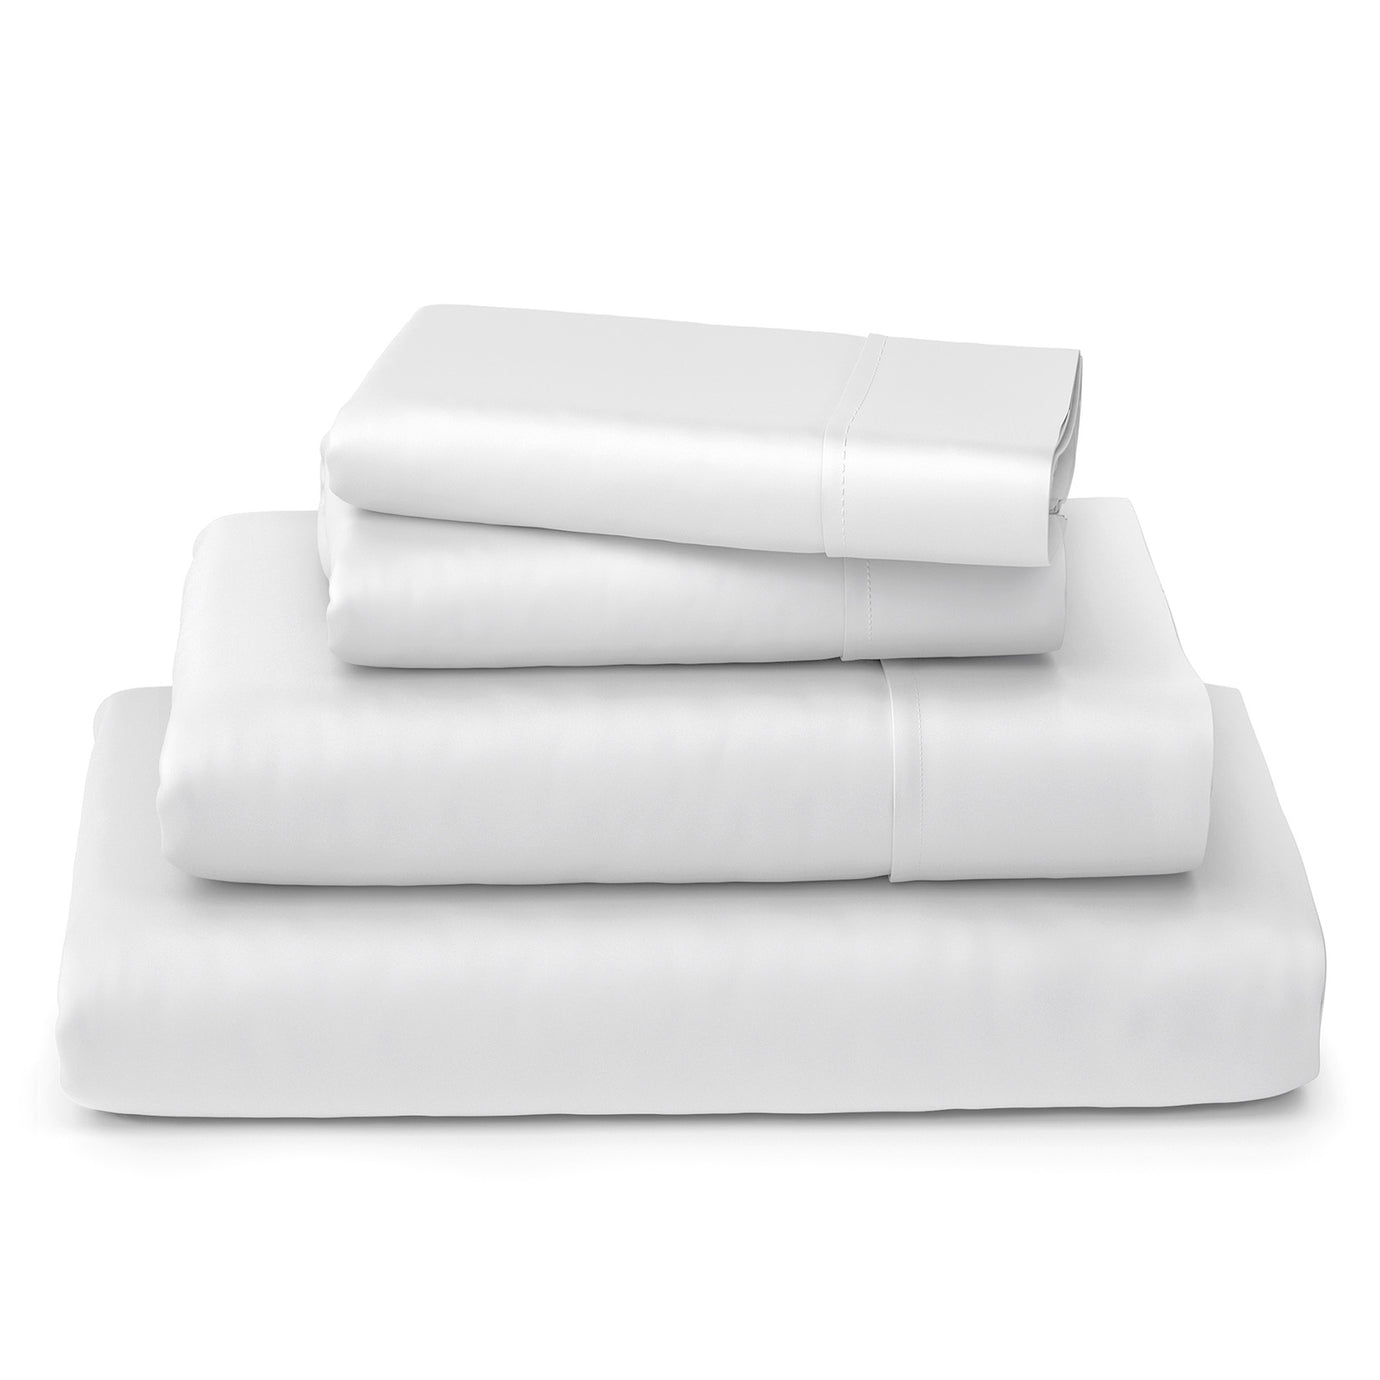 White Bed Sheet Holder, Bed Sheet Straps, Fitted Sheet & Flat